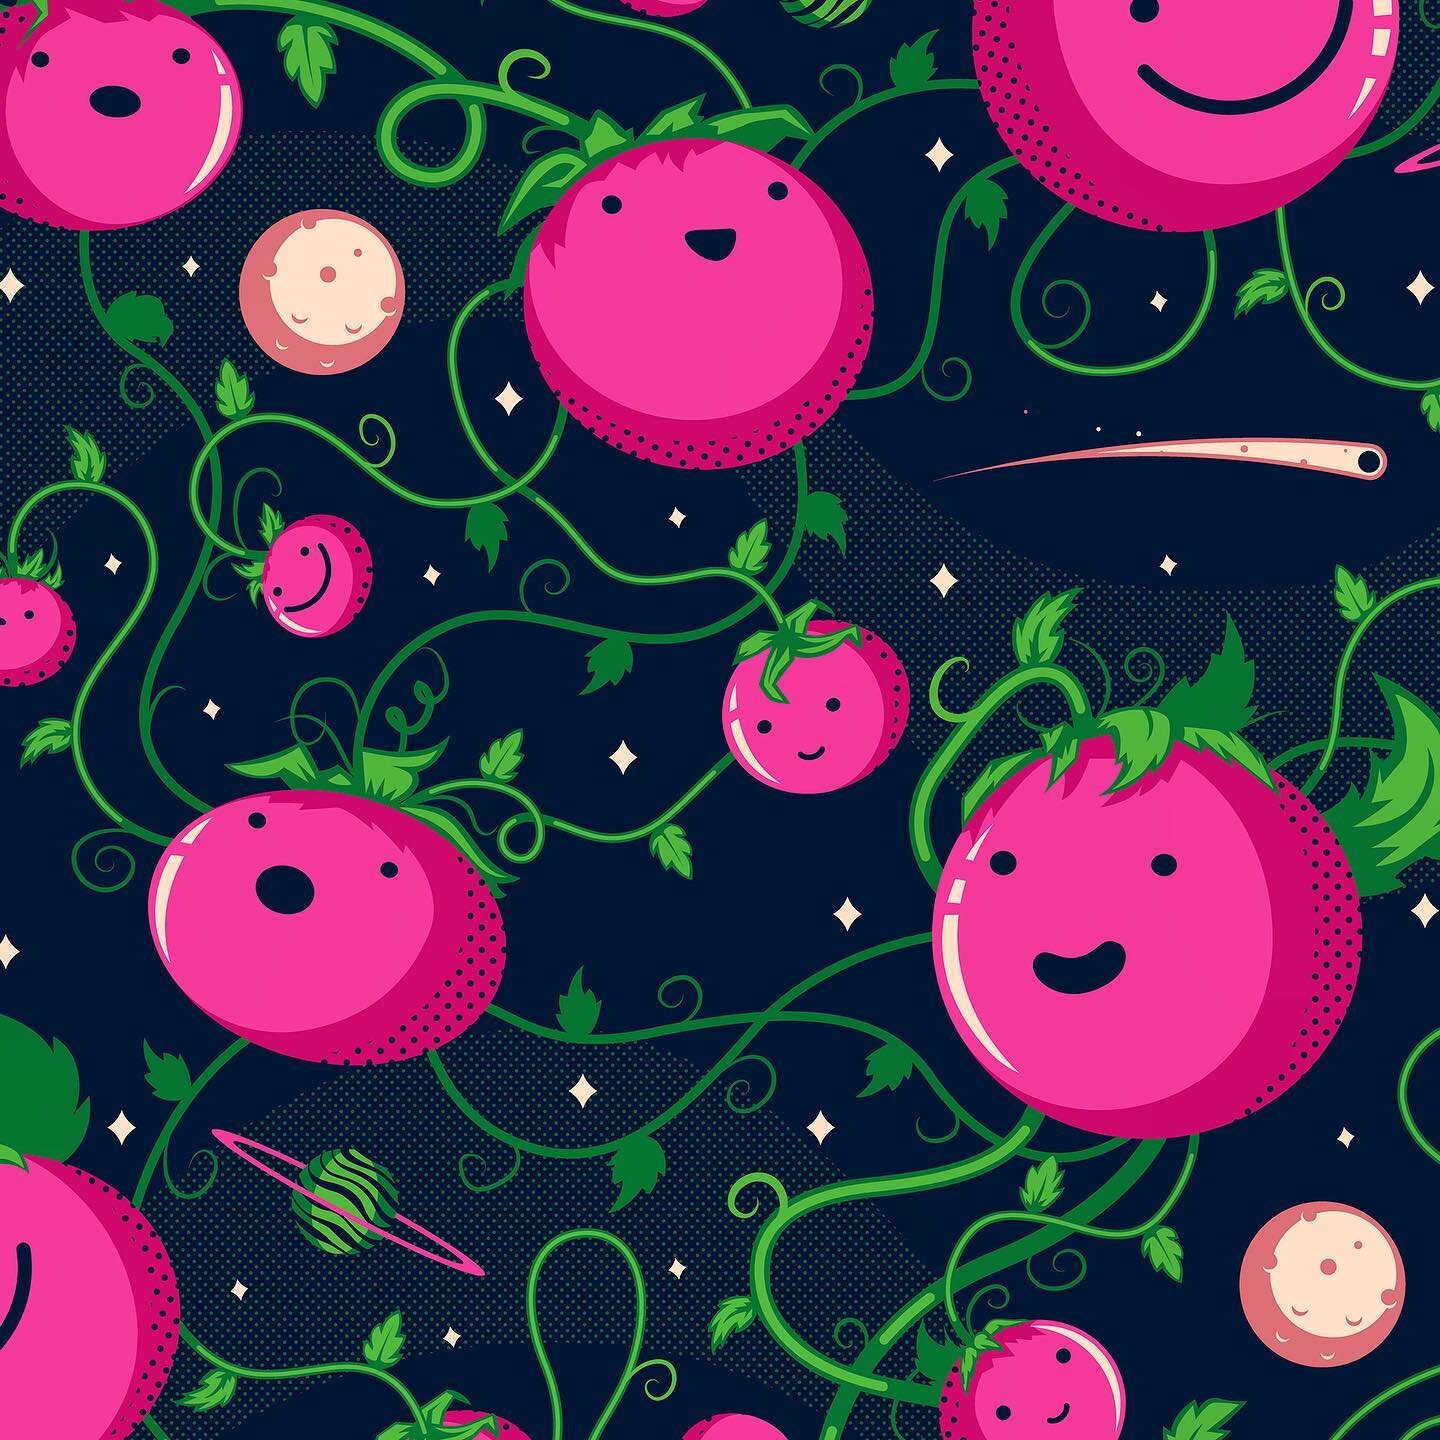 So happy to share some fun new work created for @amcoproduce checkout these lil space tomato&rsquo;s. Such an awesome concept and project, excited to see this illustration in the wild. Stay tuned 🍅 😋 #graphicdesign #illustration #illustrator #desig